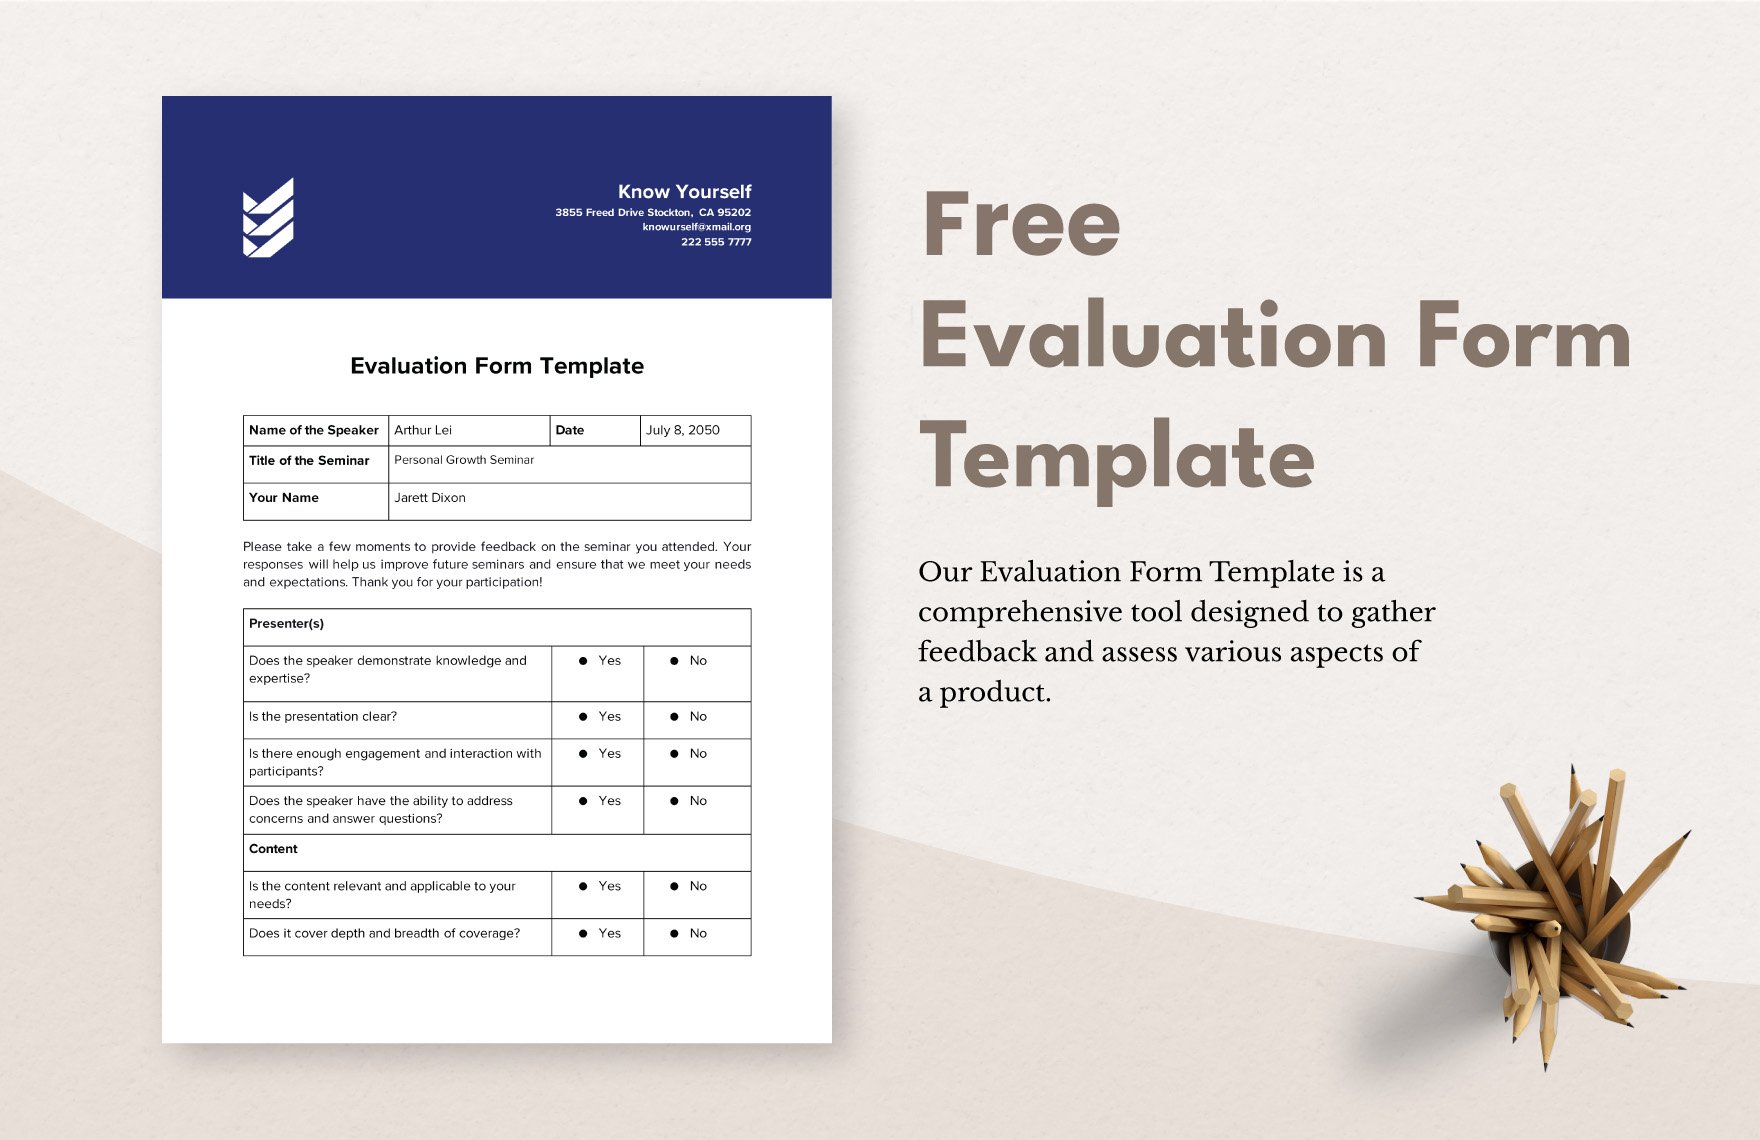 Free Evaluation Form Template